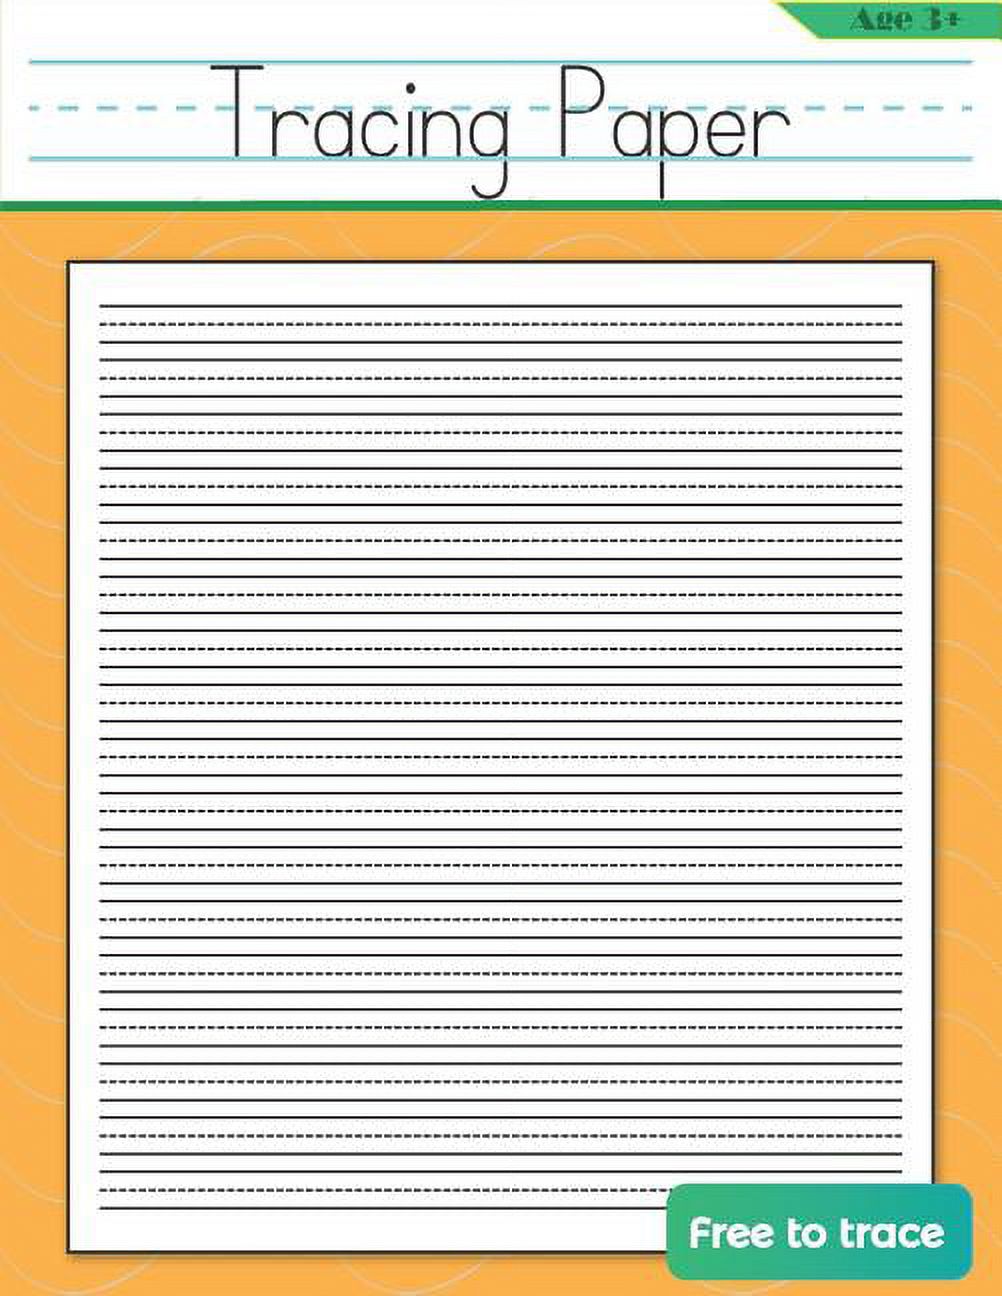 Tracing Paper: Blank Handwriting Notebook for Kids [Book]